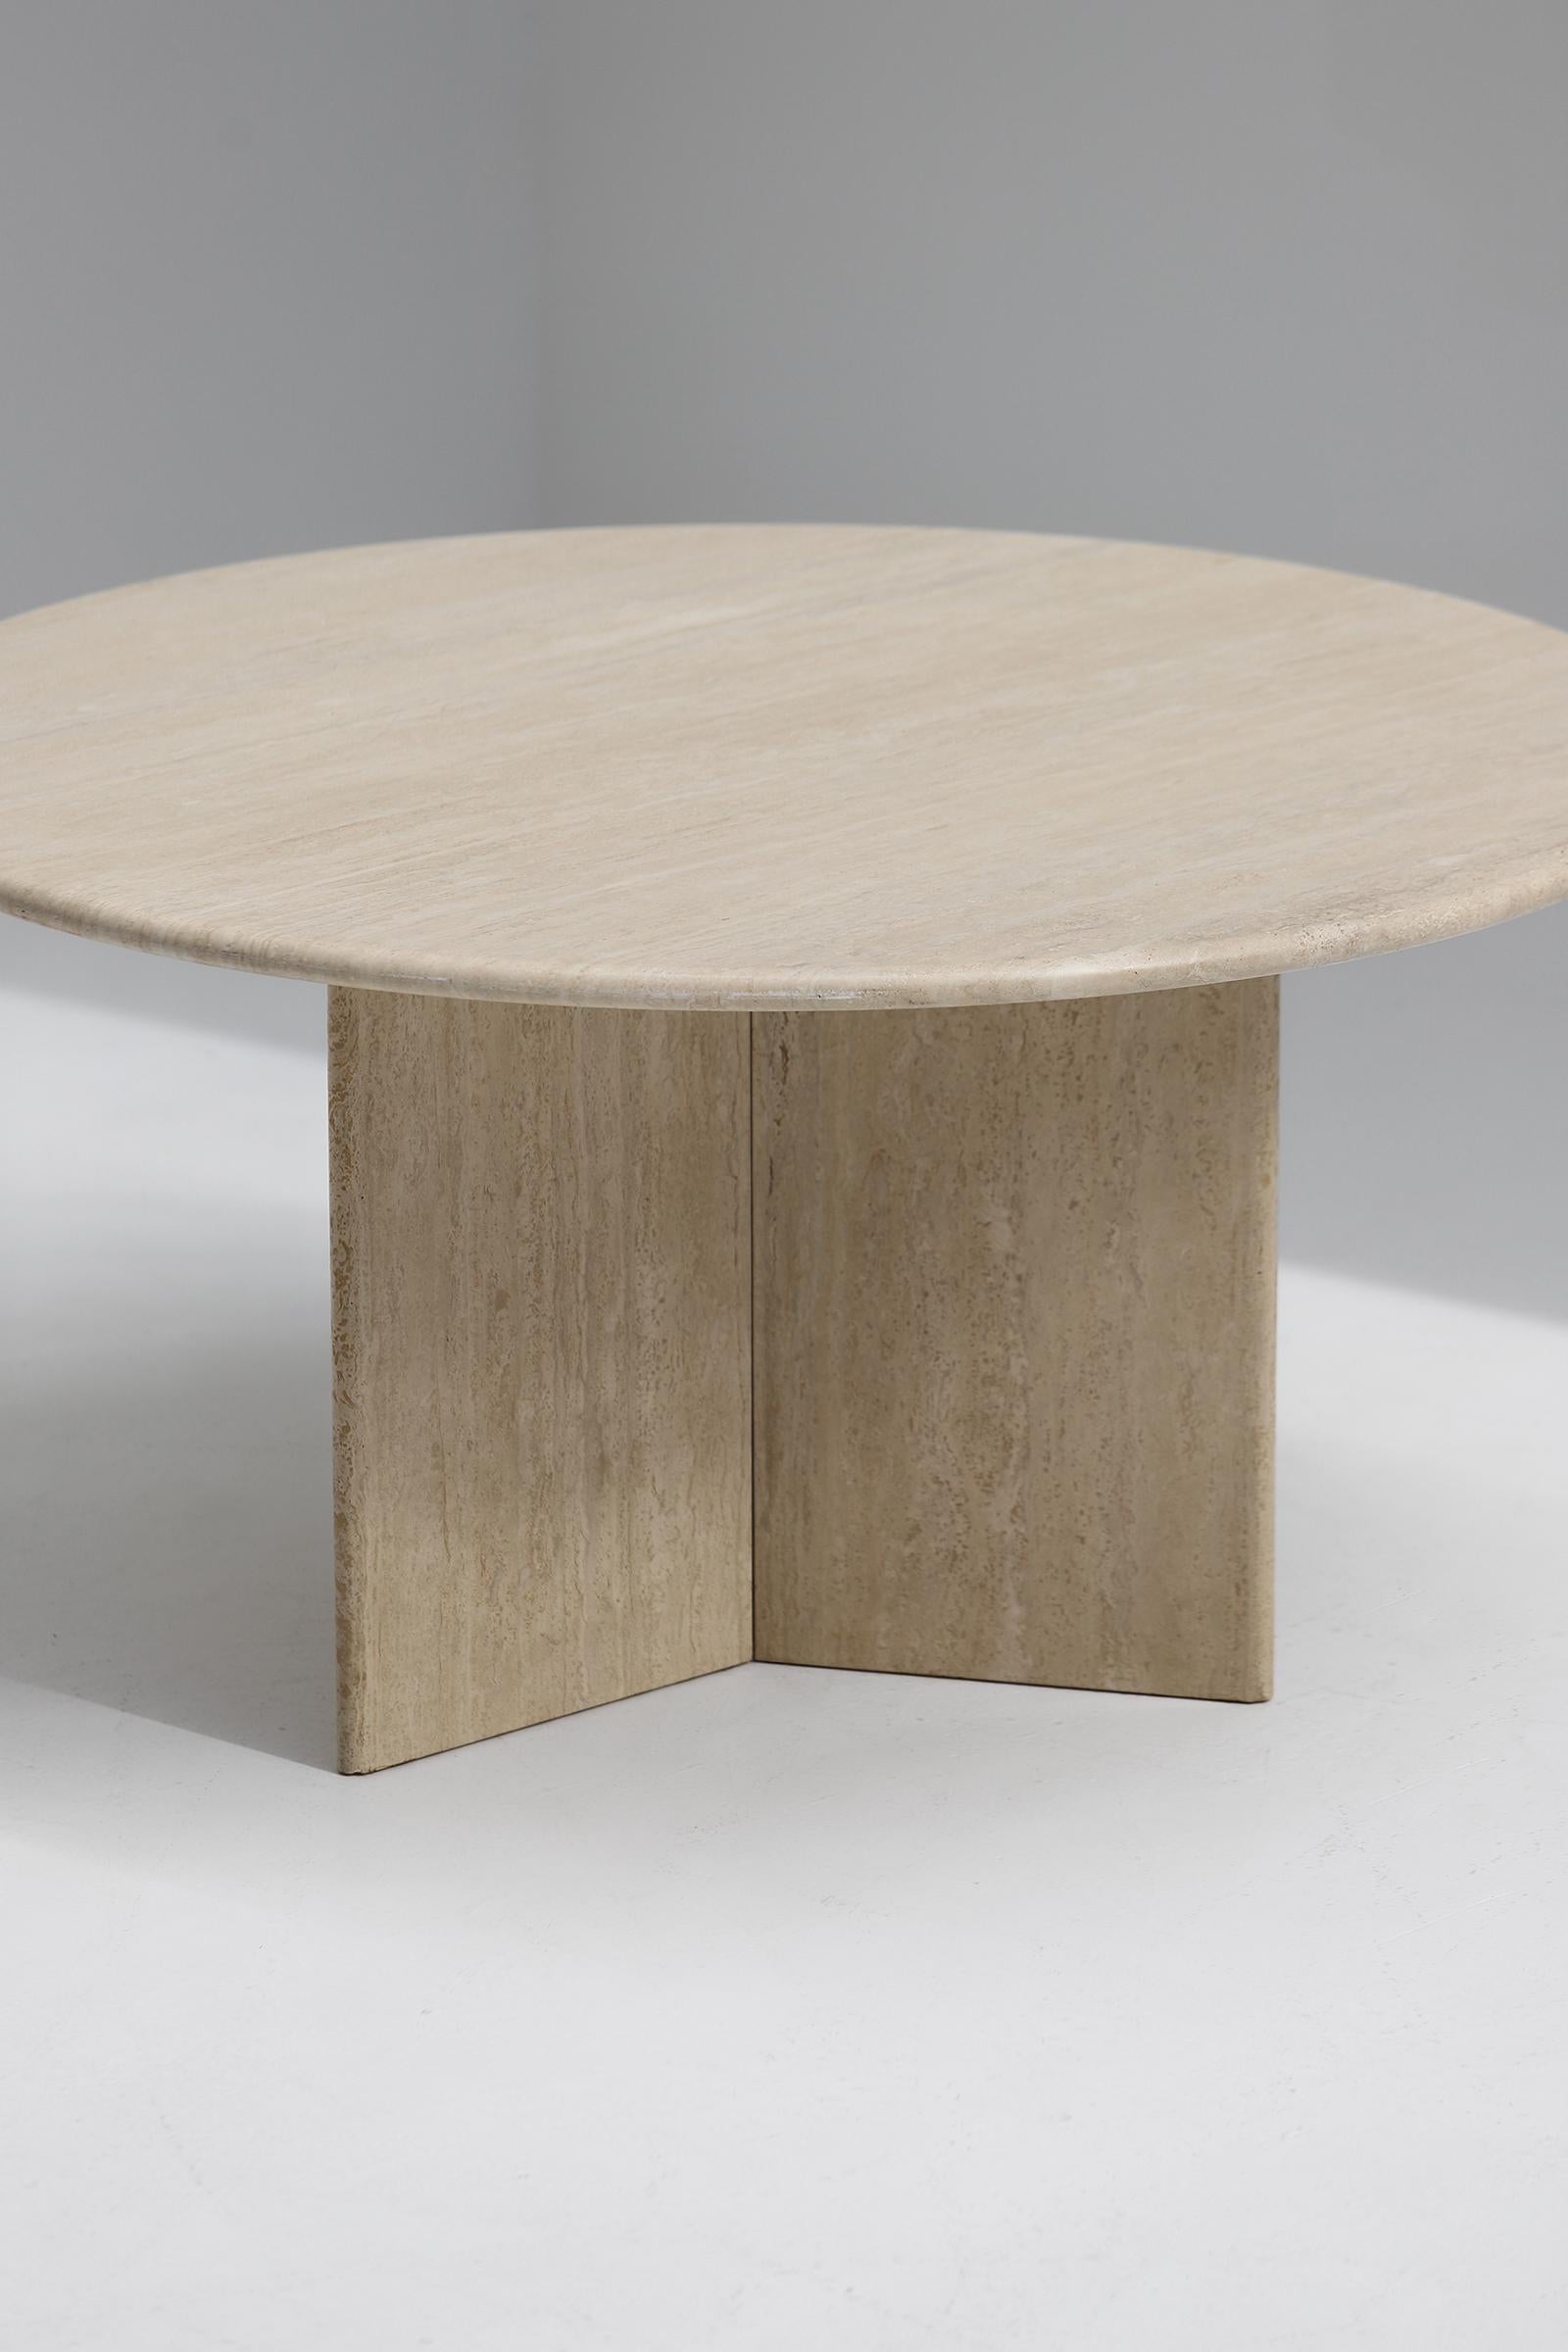 Decorative Travertine Dining Table Designed in the 1970s 3